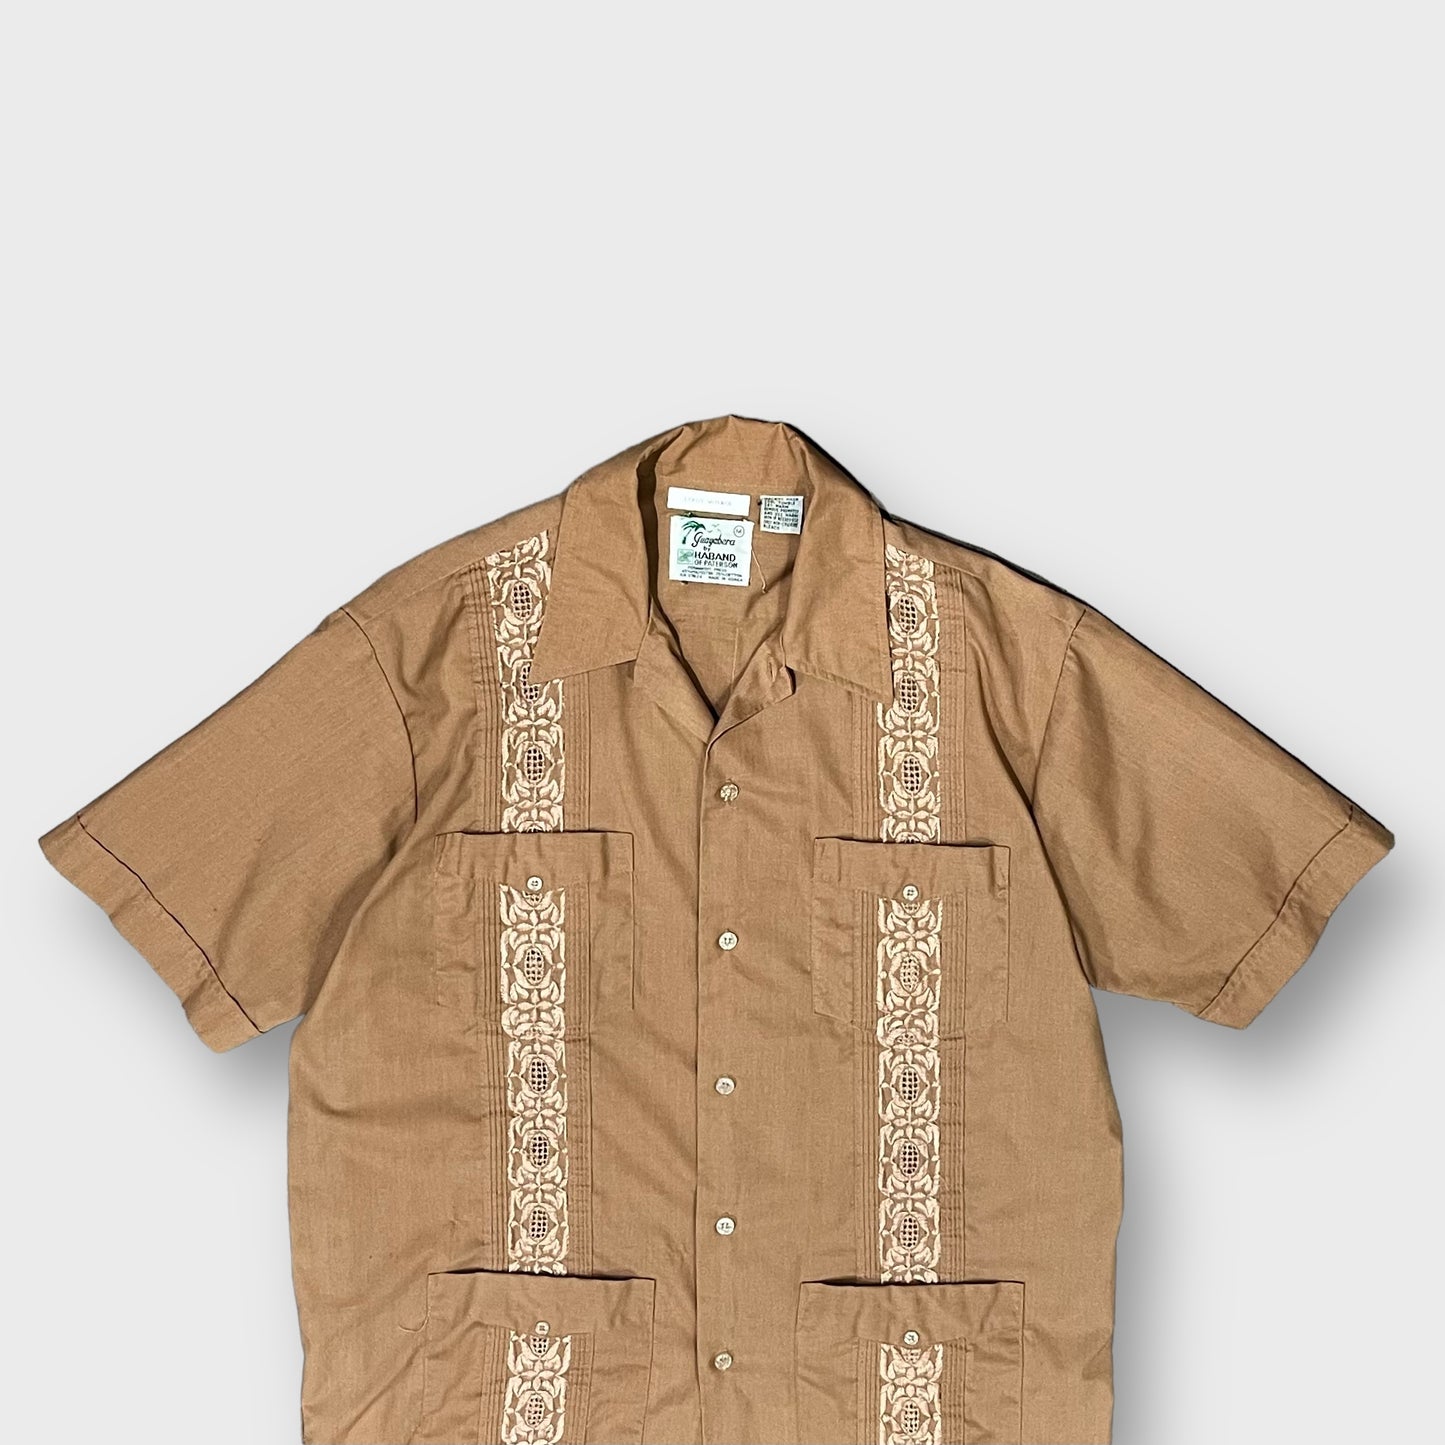 80’s “HABAND OF PATERSON”
s/s cuba shirt